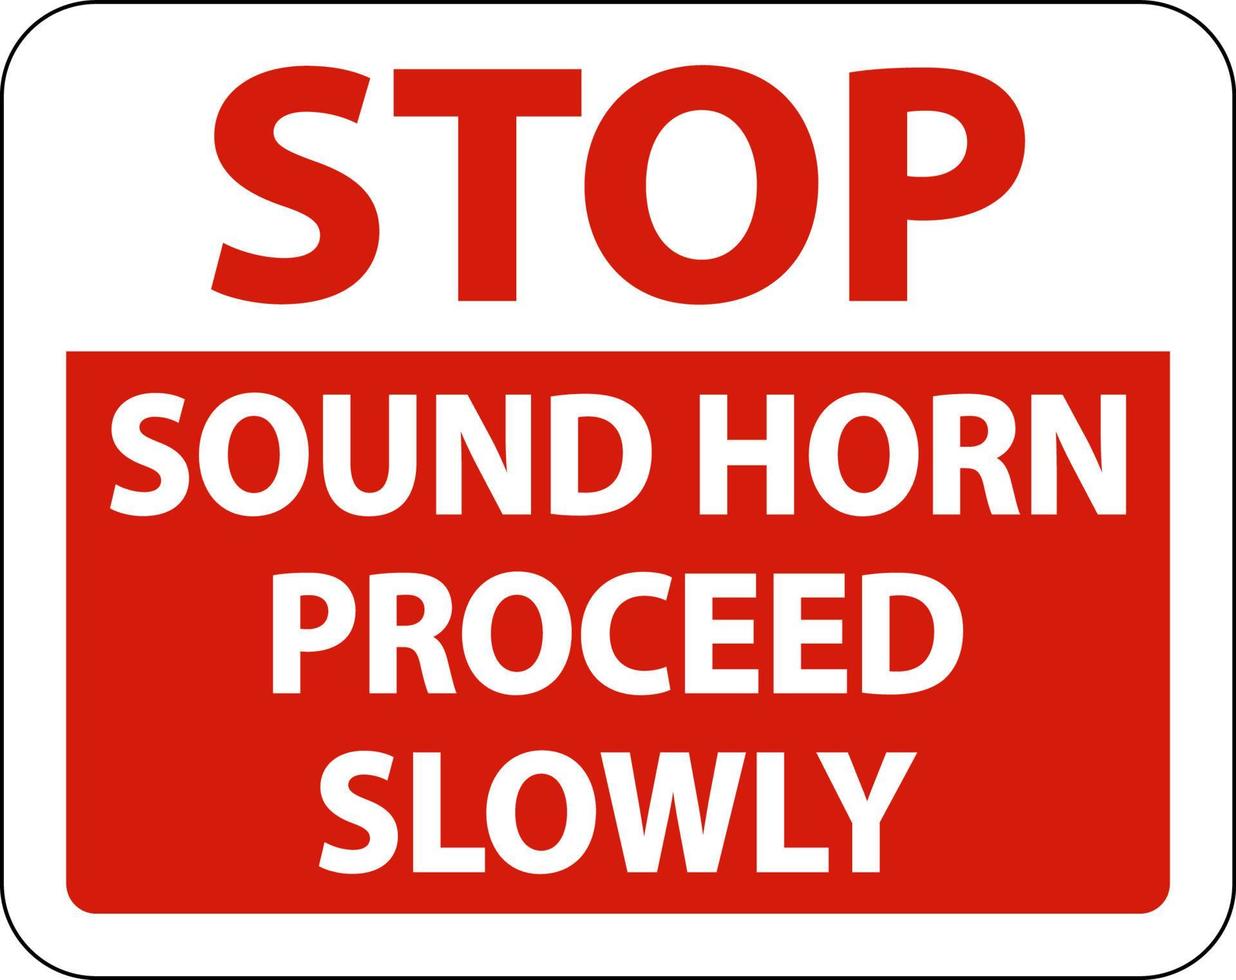 Stop Sound Horn Proceed Slowly Sign On White Background vector